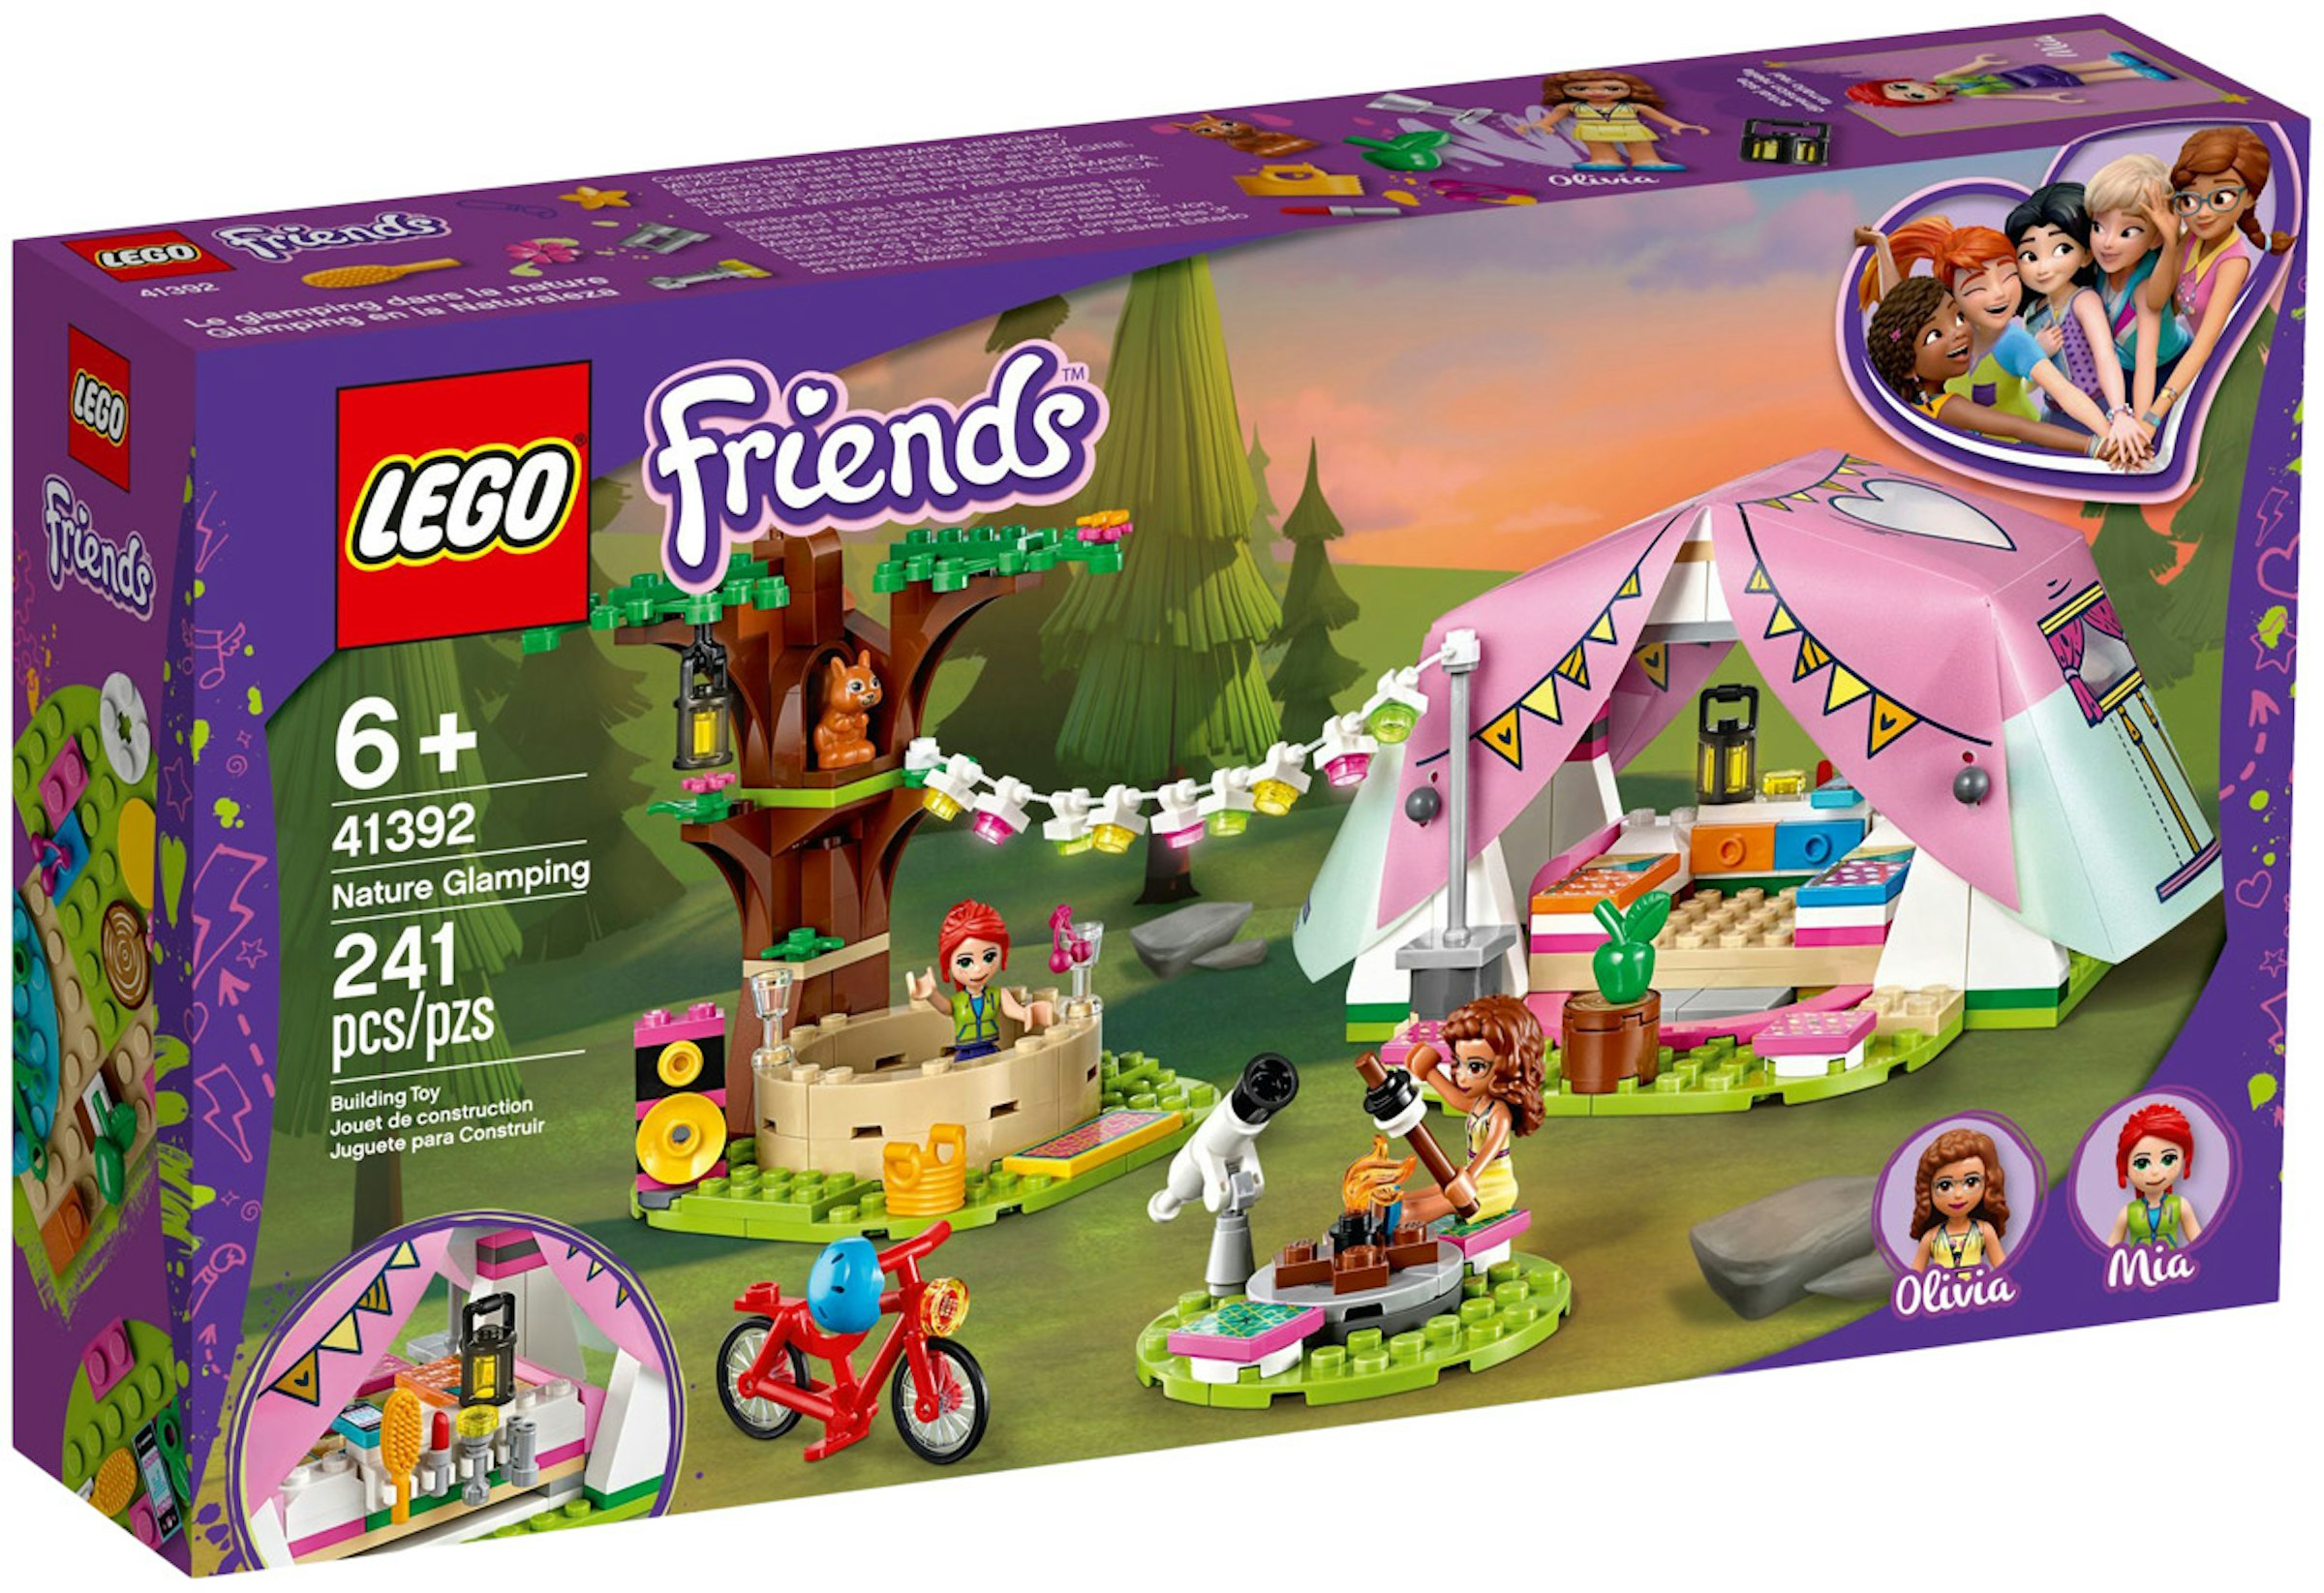 LEGO Friends Nature Glamping Set 41392 -